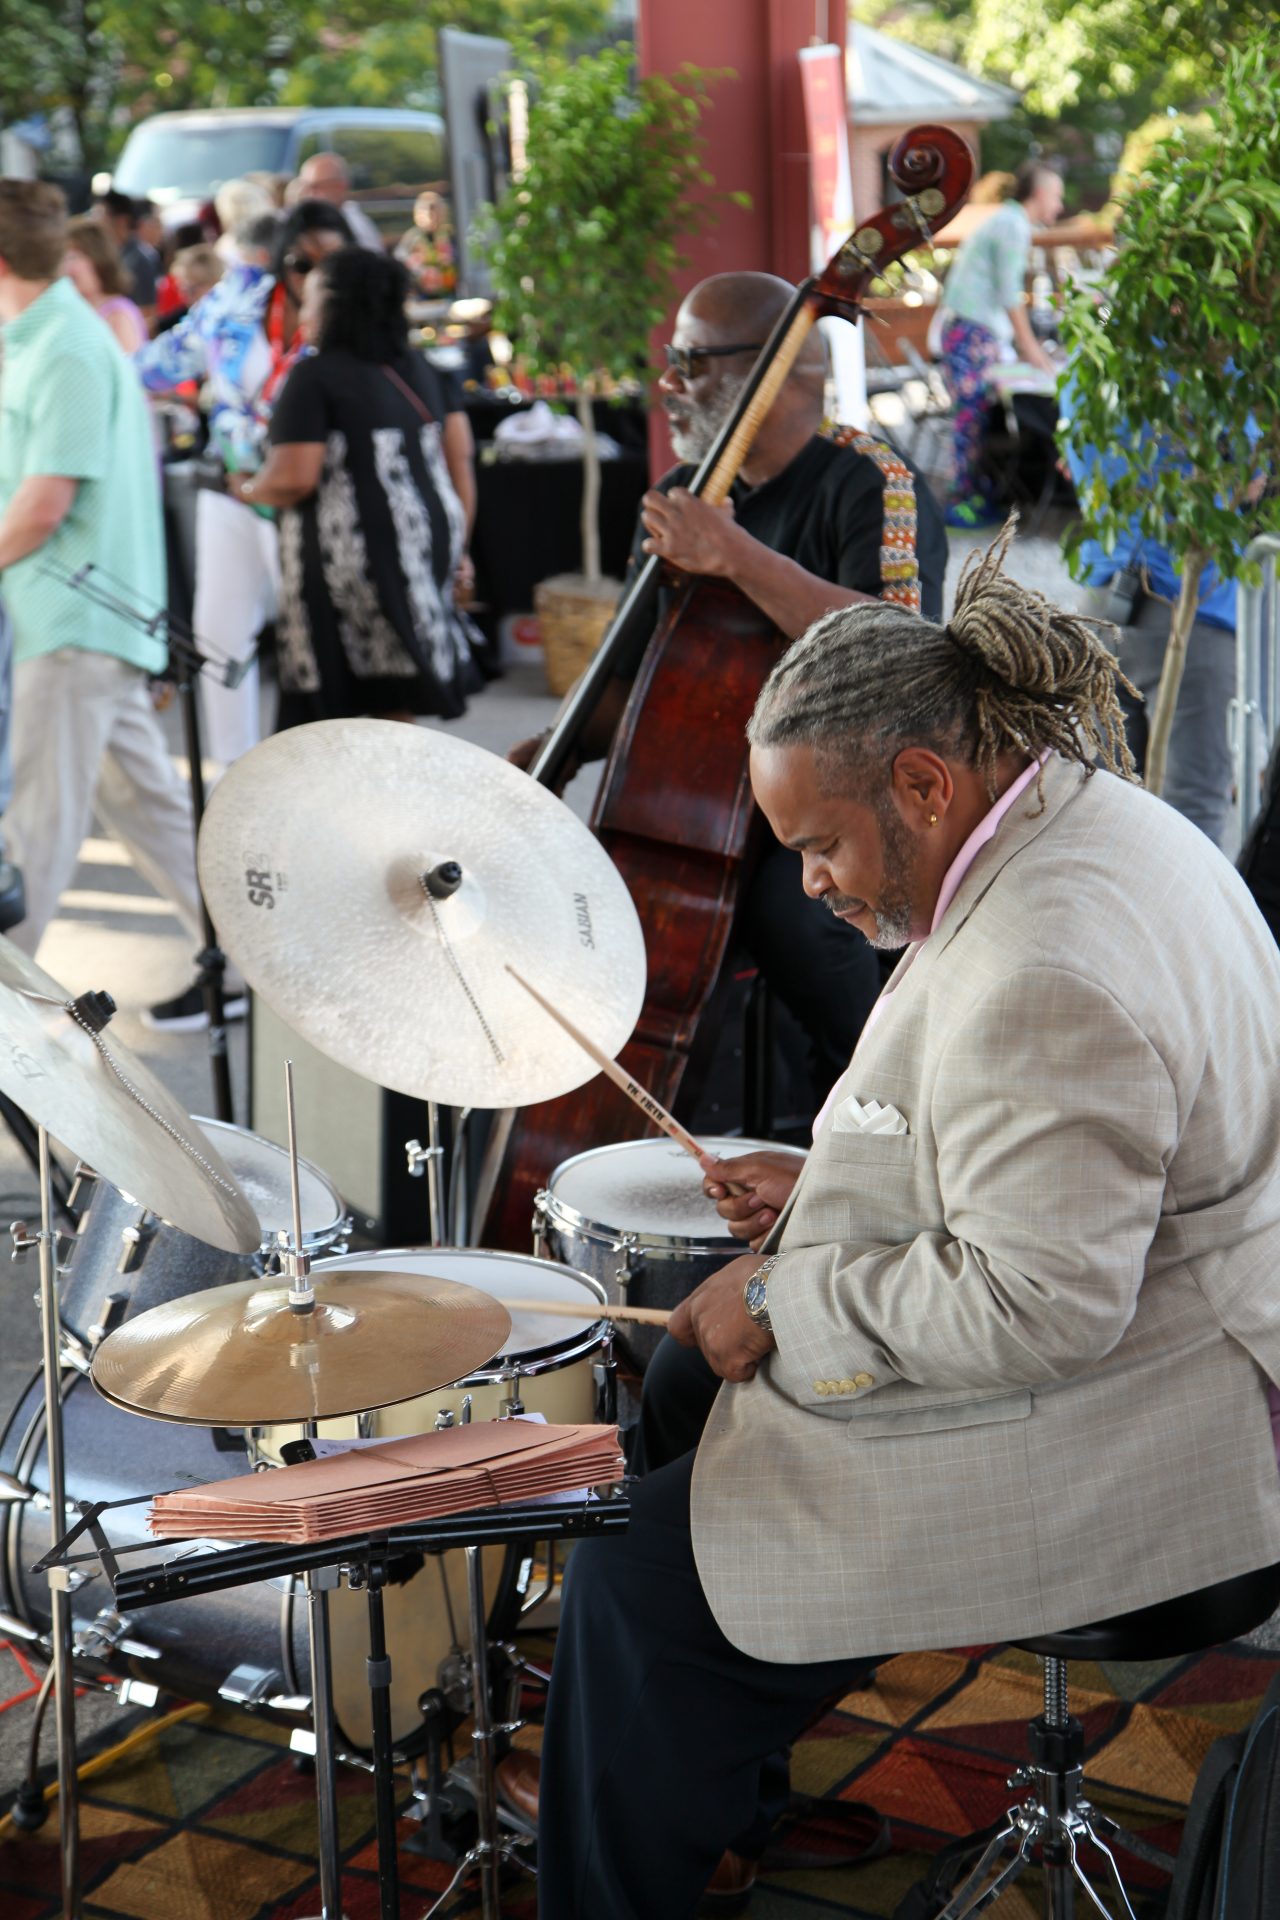 Members of a live band play the drums and upright bass